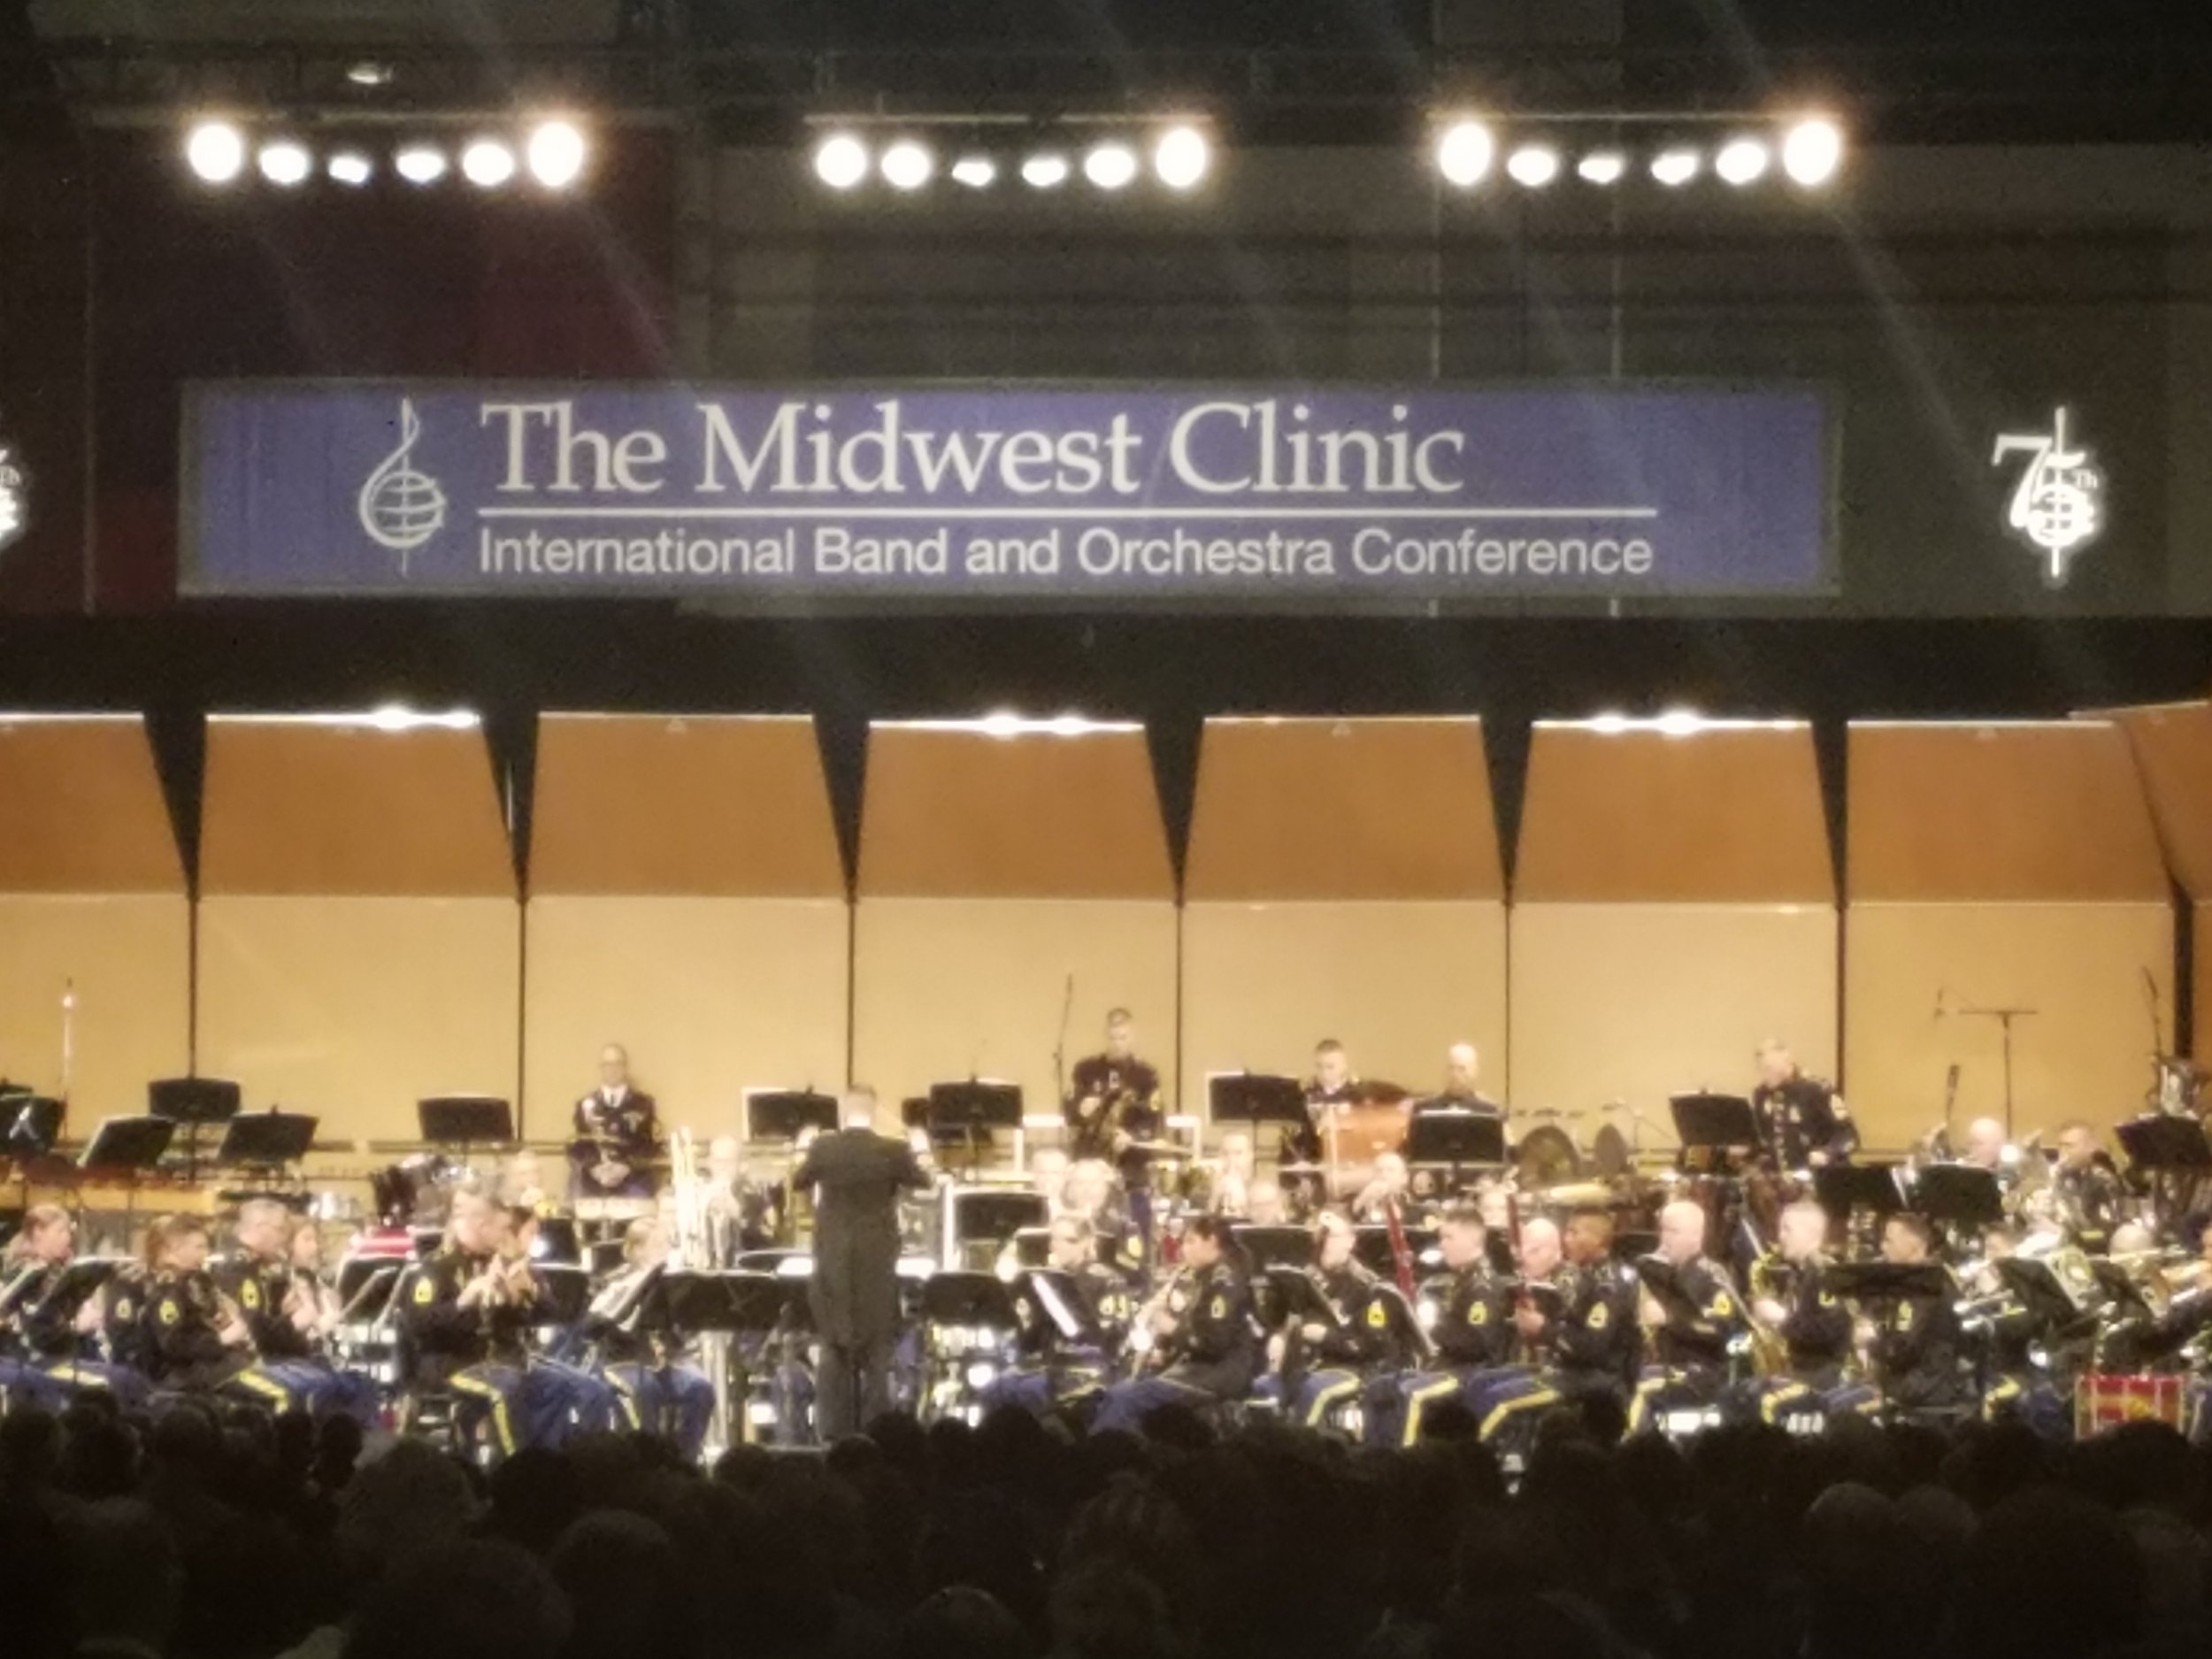  US Army Field Band Concert at the Midwest Clinic 